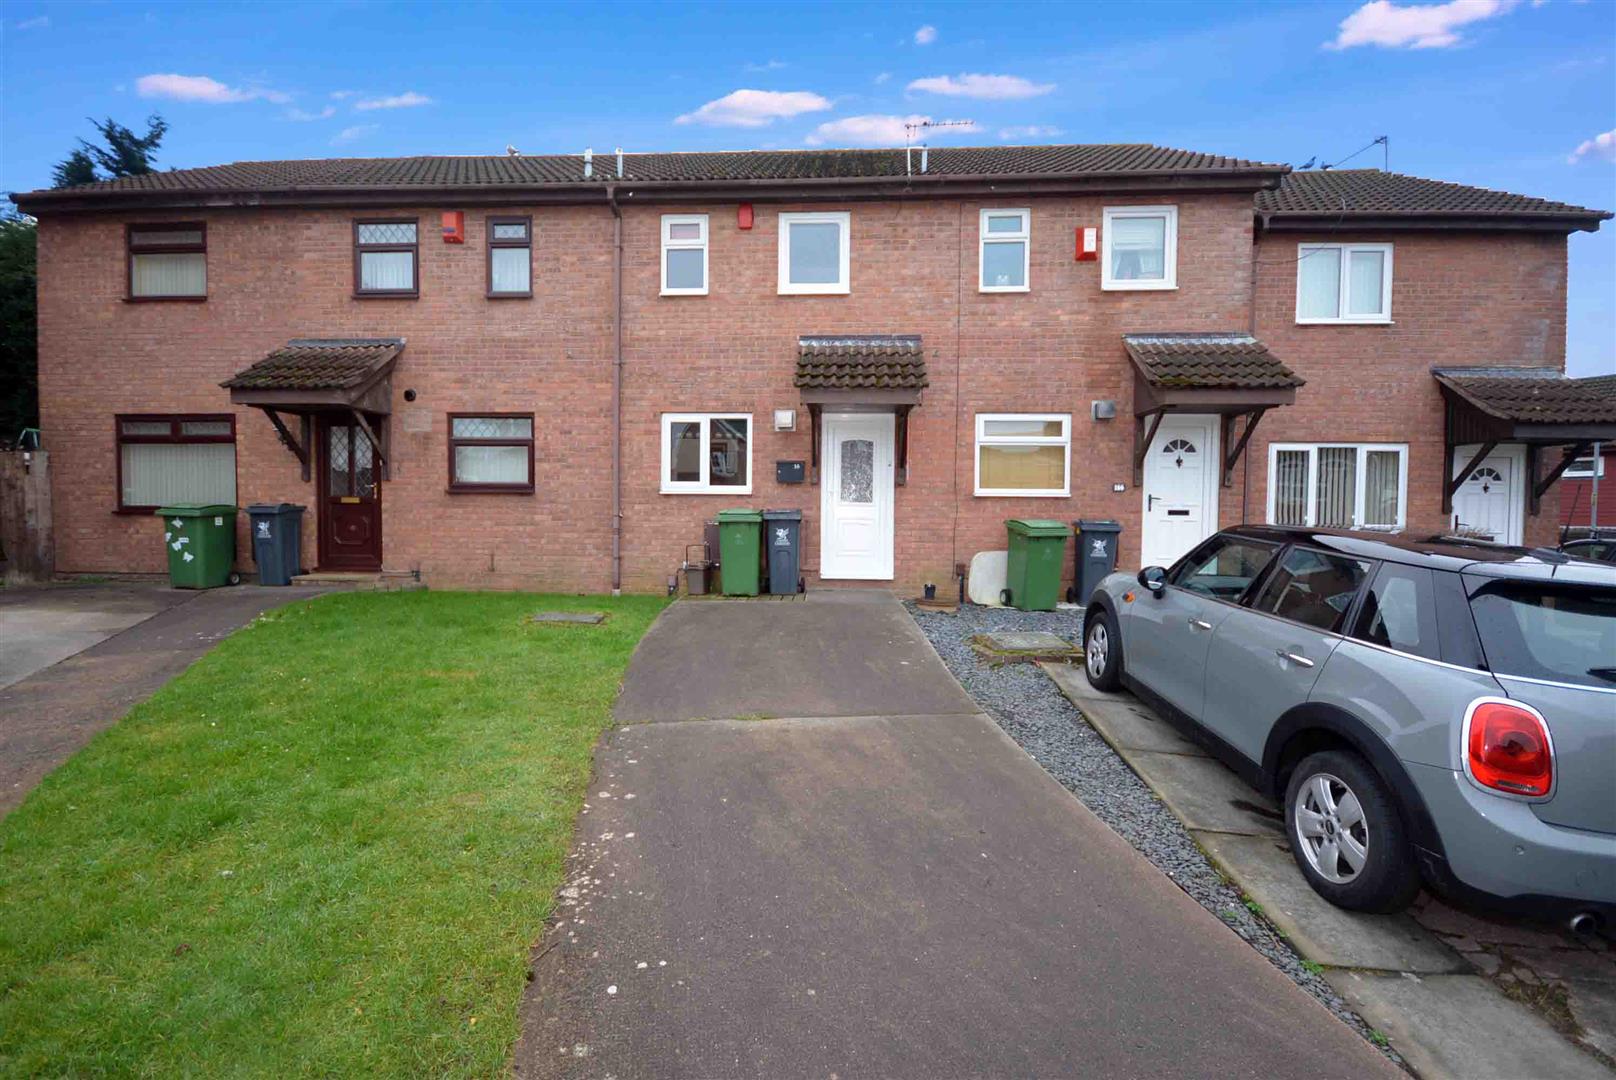 2 bed terraced house for sale in Bryn Heulog, Cardiff - Property Image 1